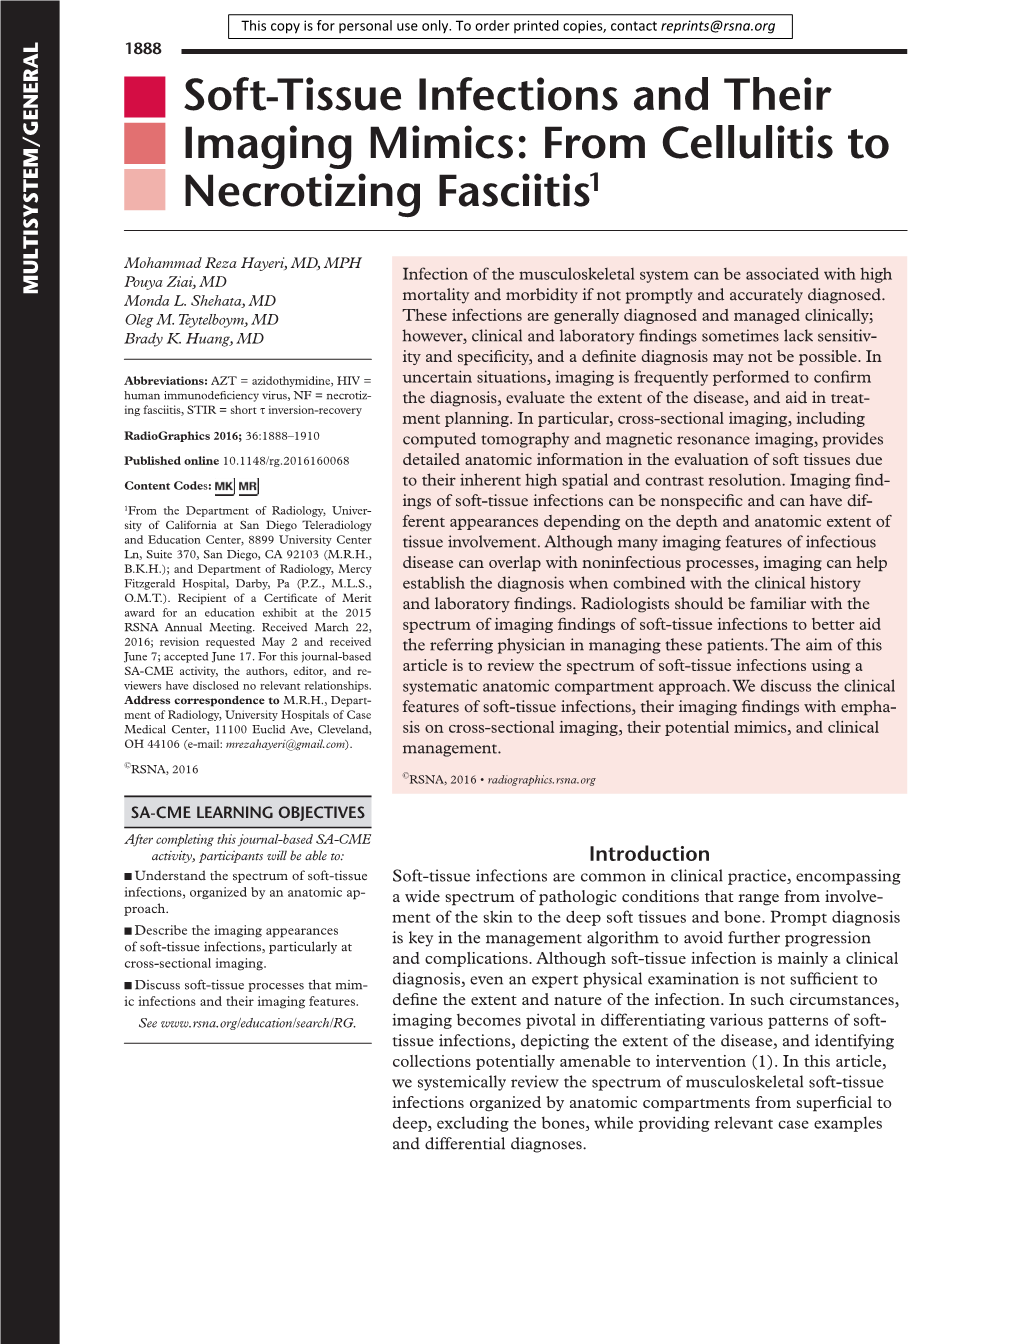 Soft-Tissue Infections and Their Imaging Mimics: from Cellulitis to Necrotizing Fasciitis1